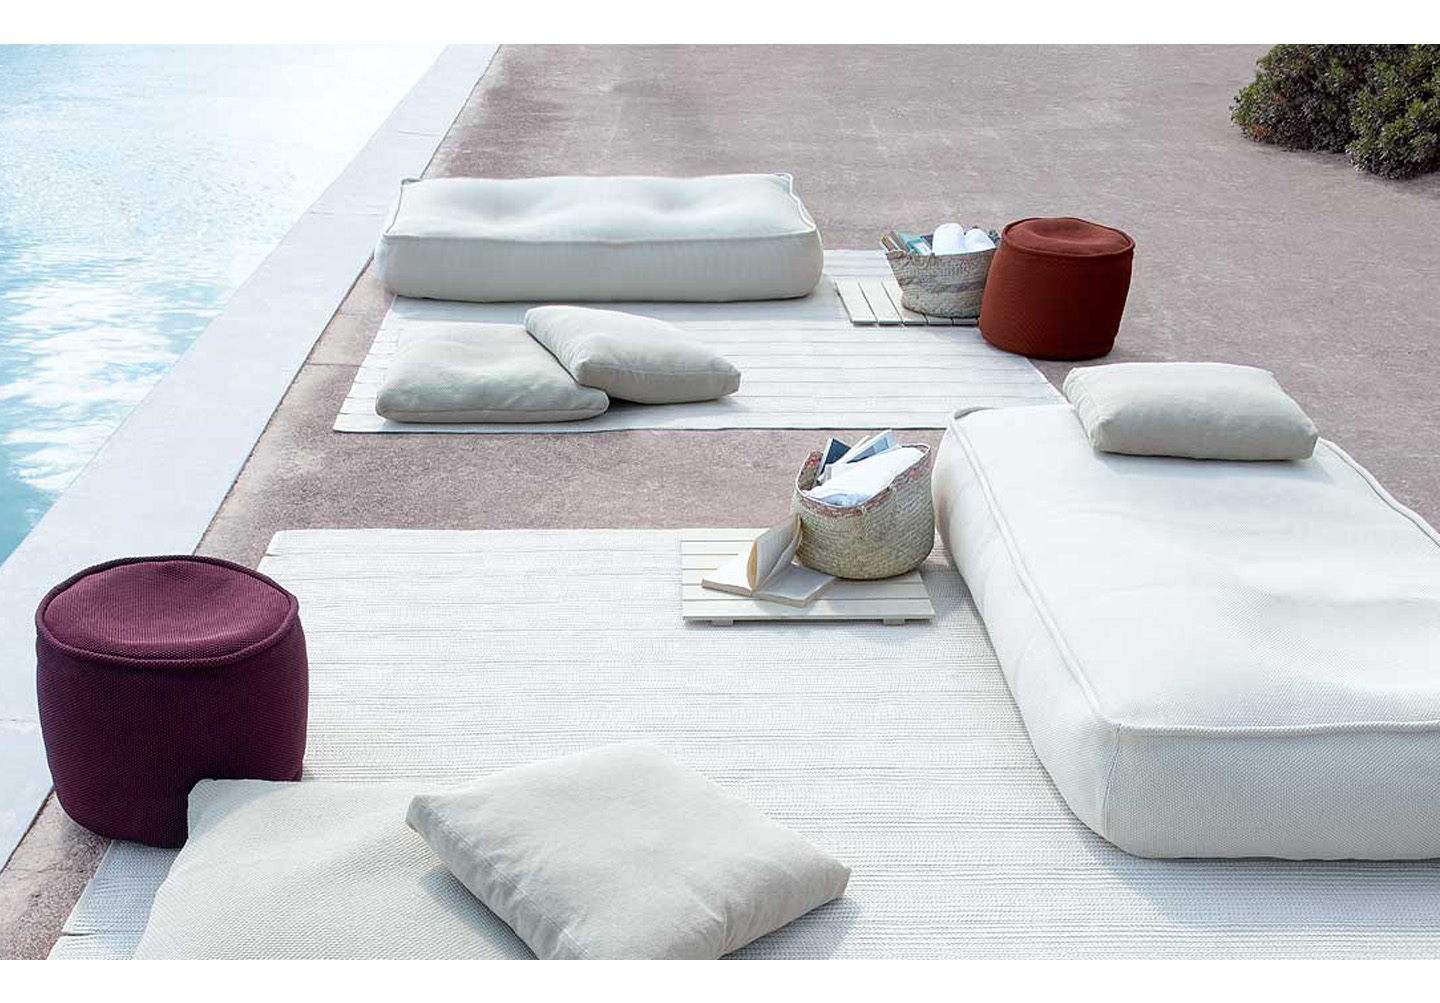 Clover outdoor cushions